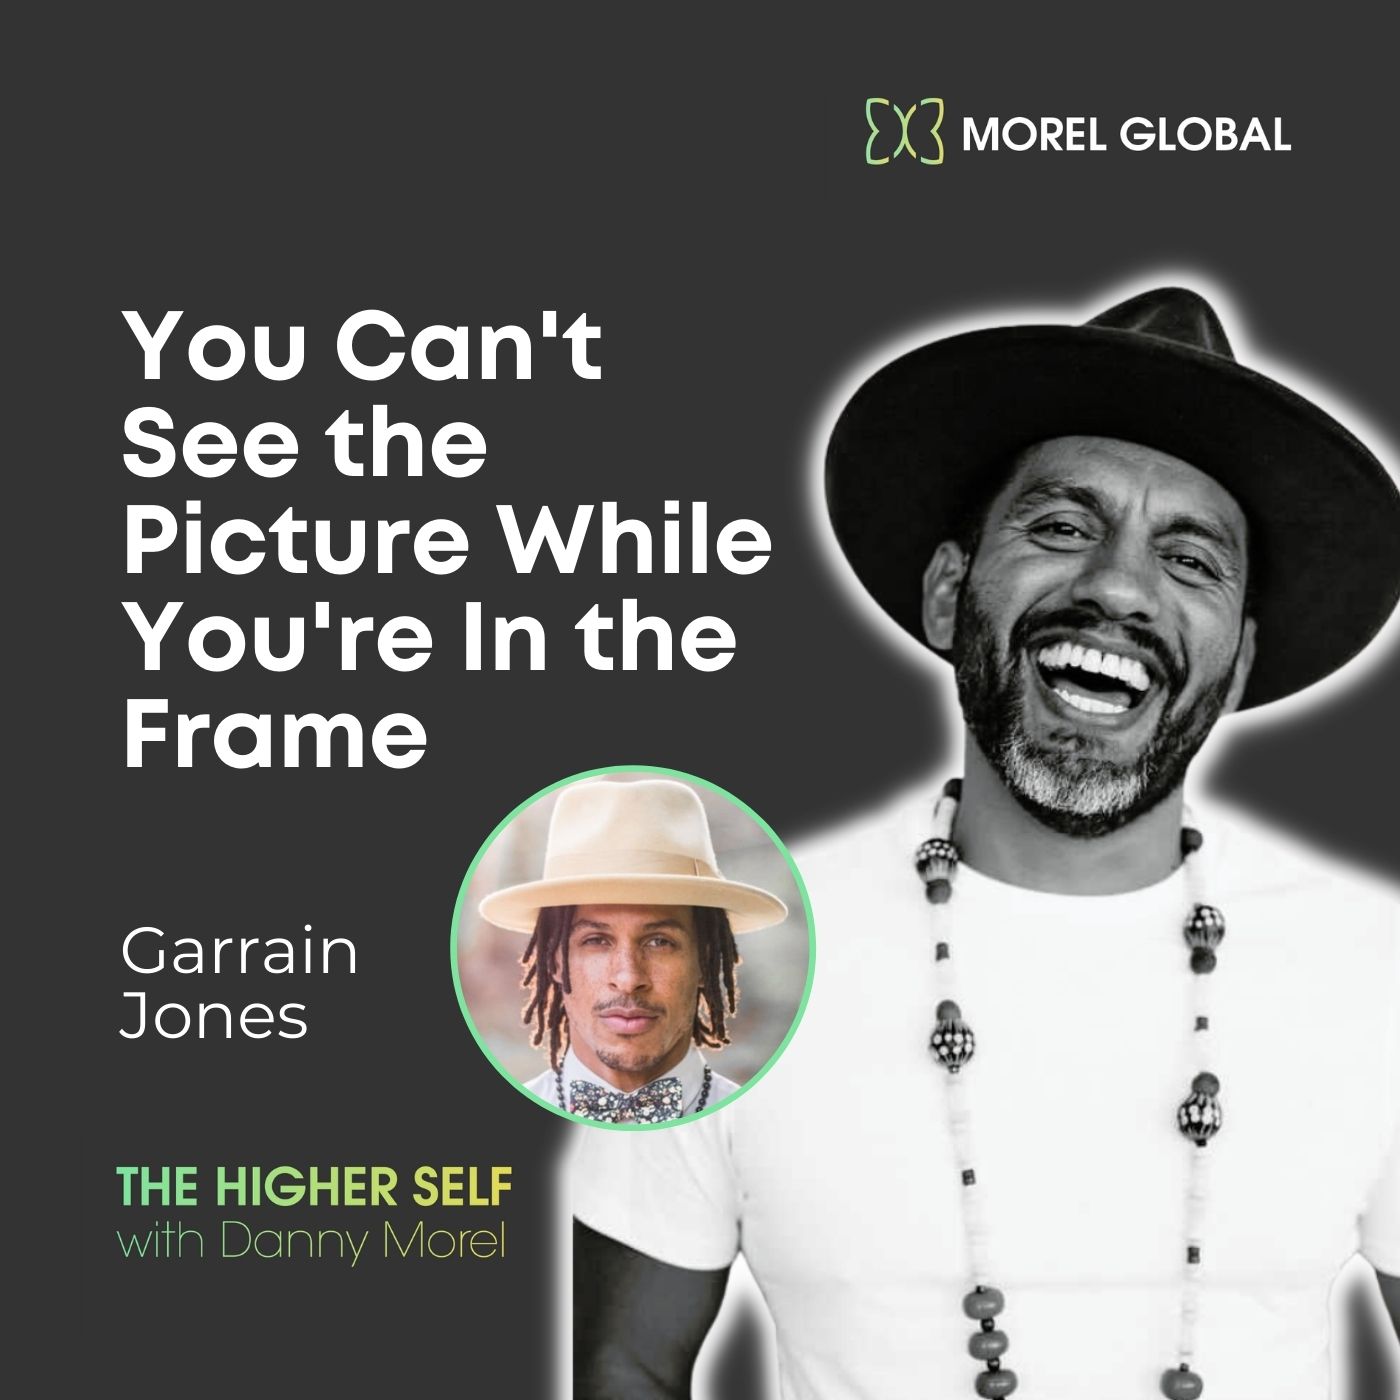 043 Garrain Jones - You Can't See the Picture While You're In the Frame Image